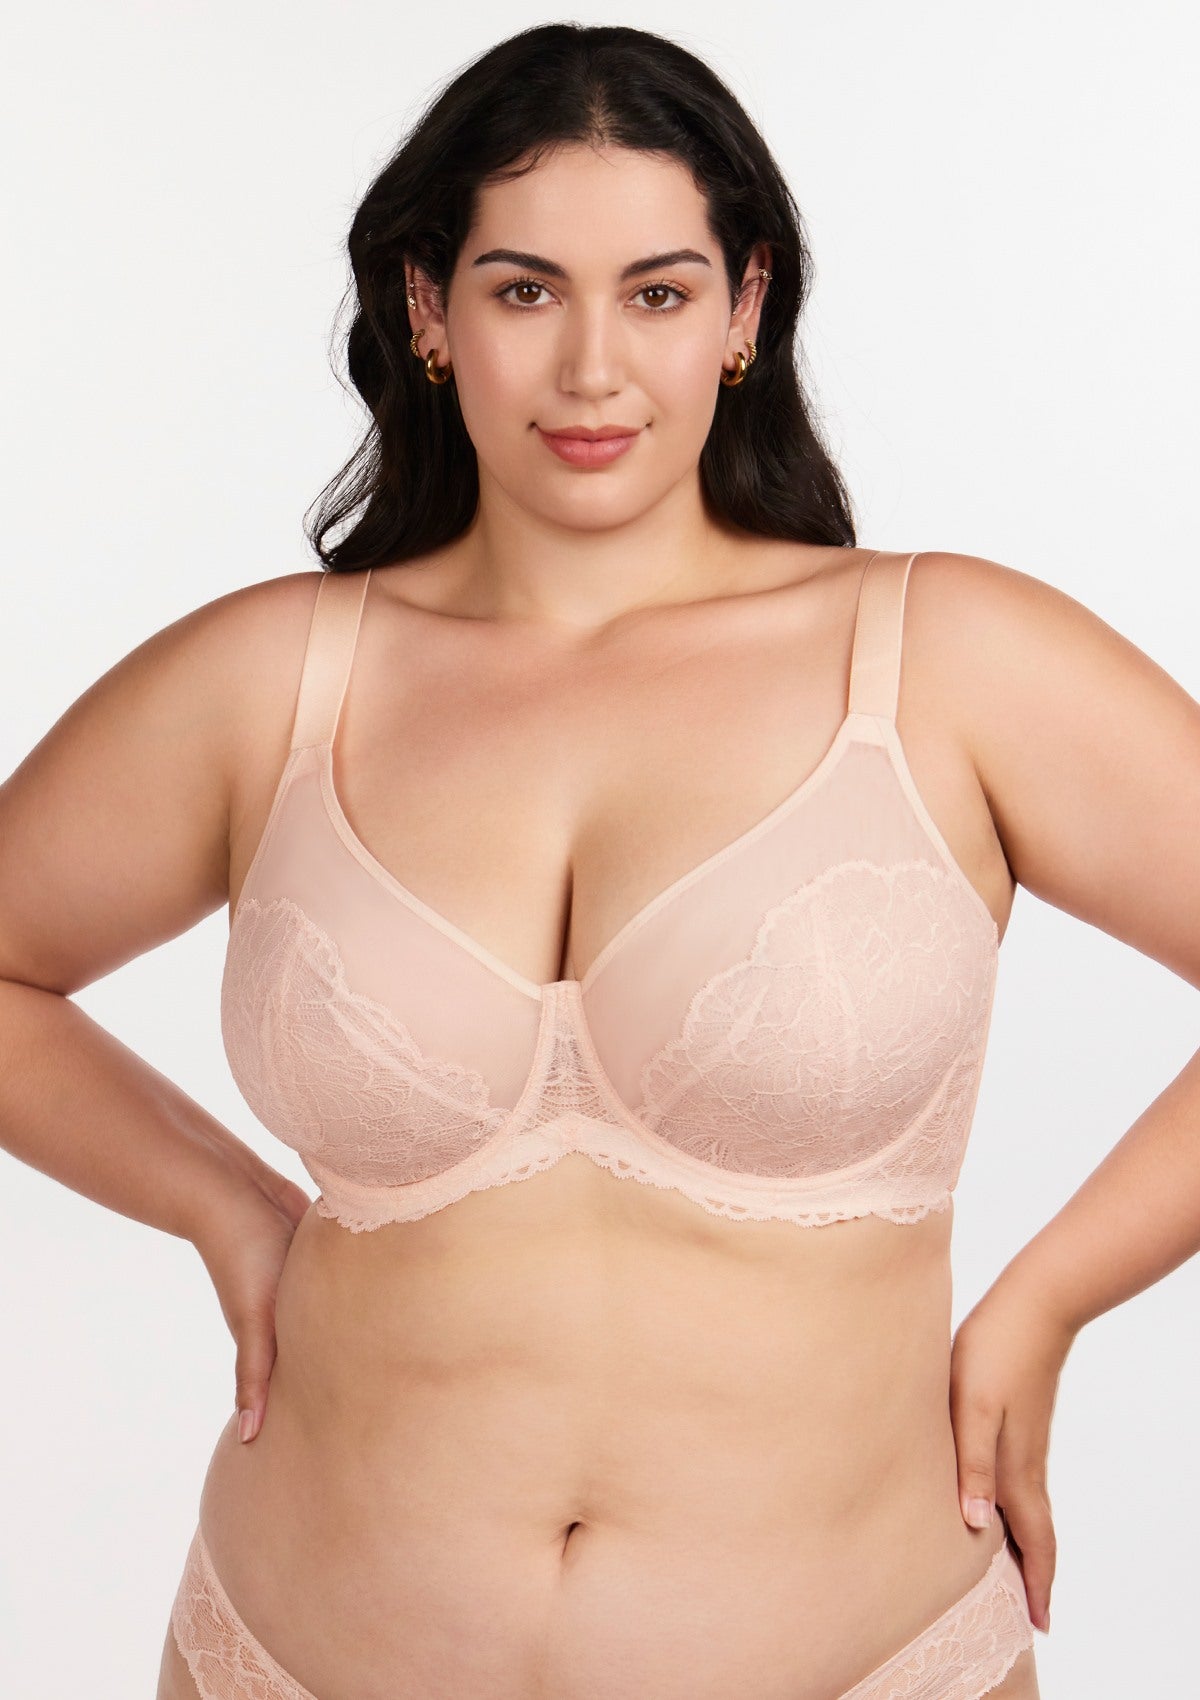 HSIA Blossom Sheer Lace Bra: Comfortable Underwire Bra For Big Busts - Dusty Peach / 36 / G